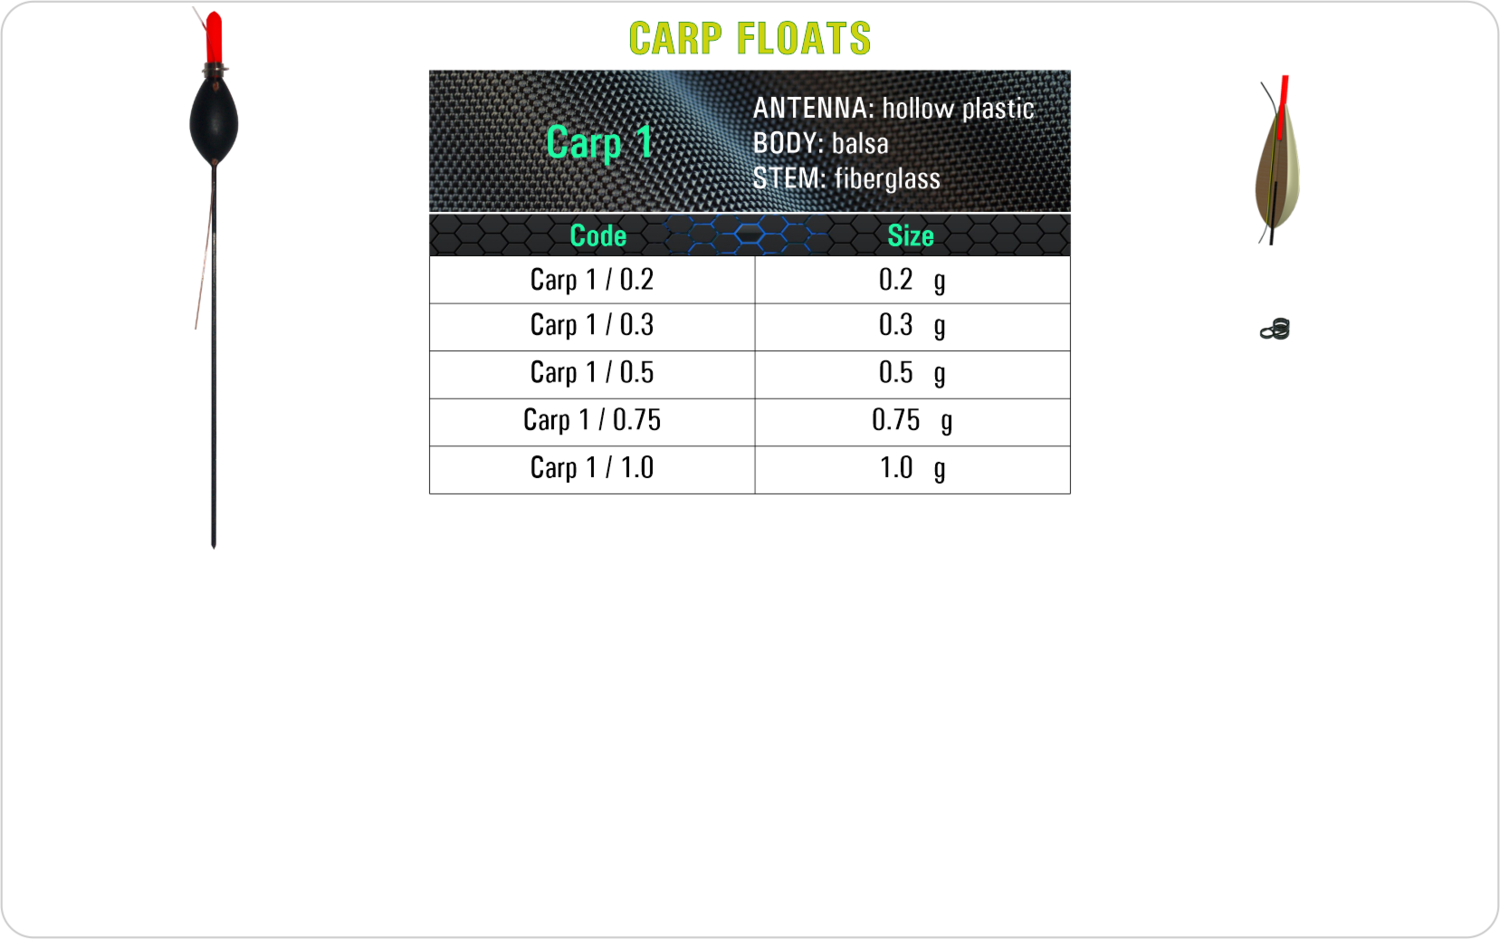 SF Carp 1 Carp float model and table containing an additional information about this float with different codes, sizes, types of the body, the stem and the antenna of the float.